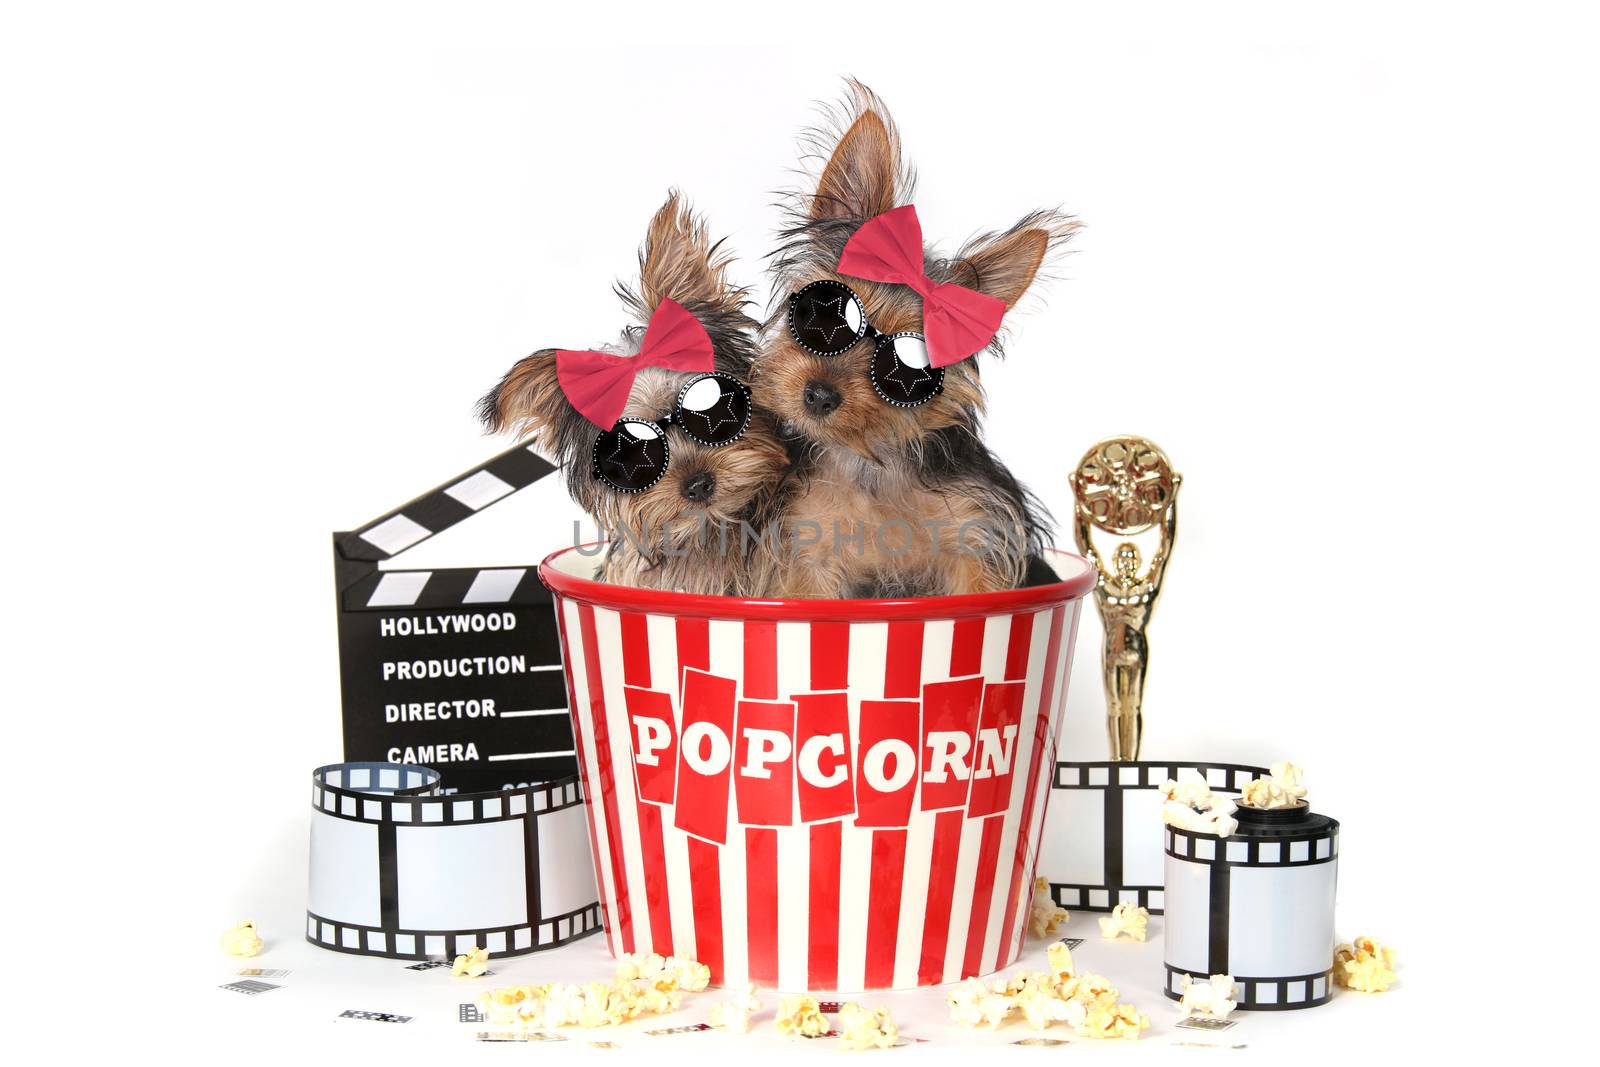 Cool Yorkshire Terrier Puppies Celebrating Hollywood Movies by tobkatrina